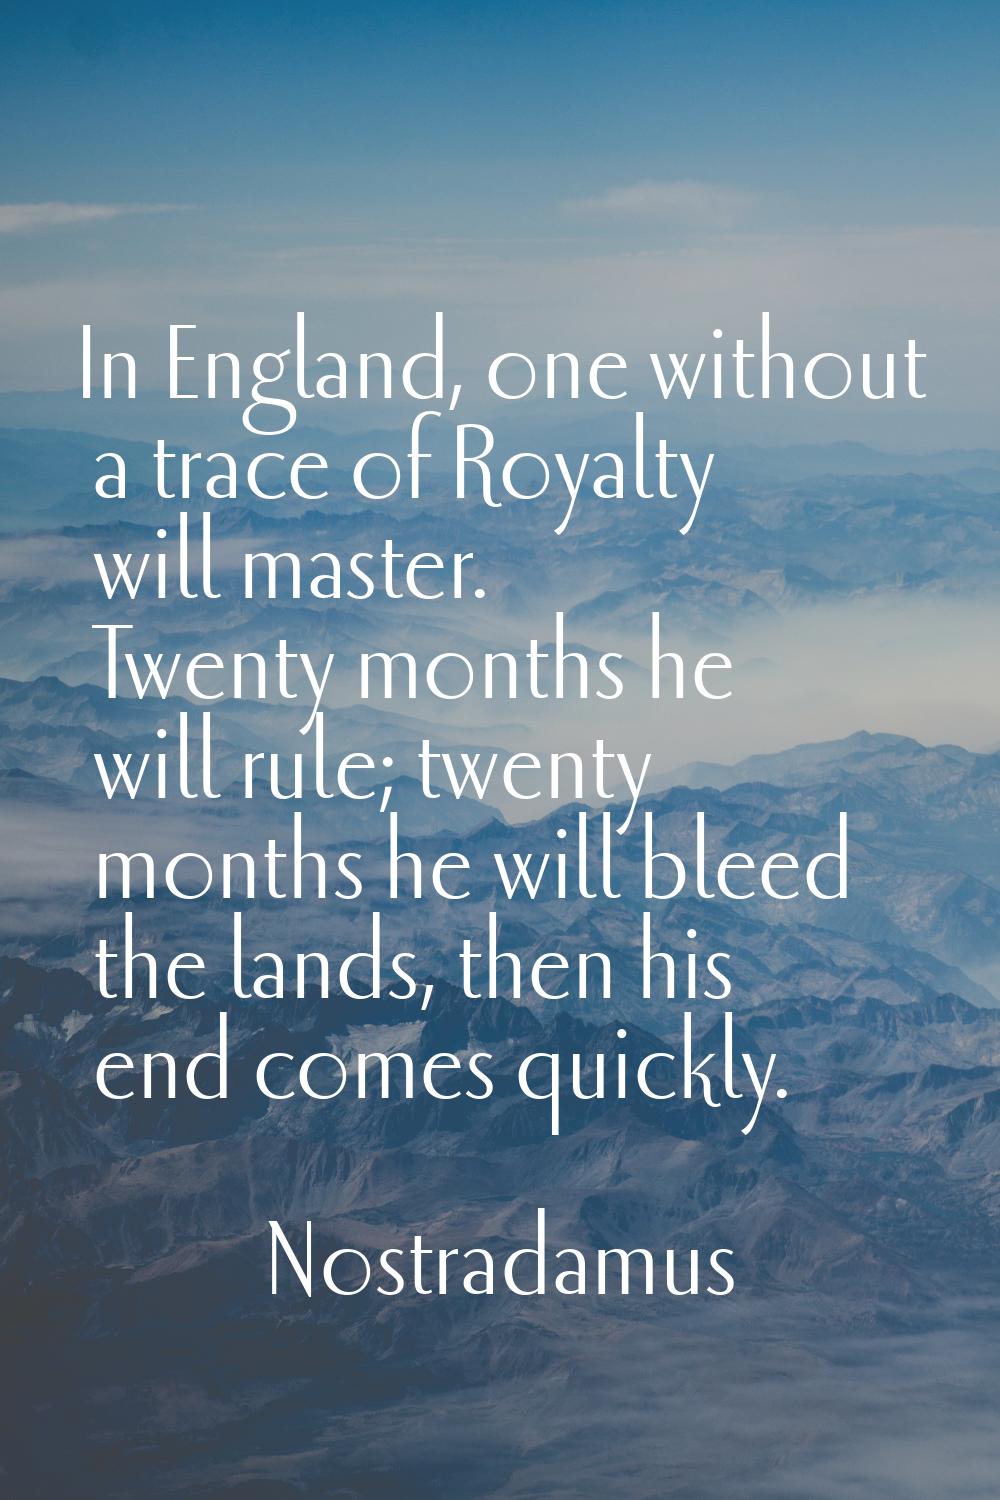 In England, one without a trace of Royalty will master. Twenty months he will rule; twenty months h